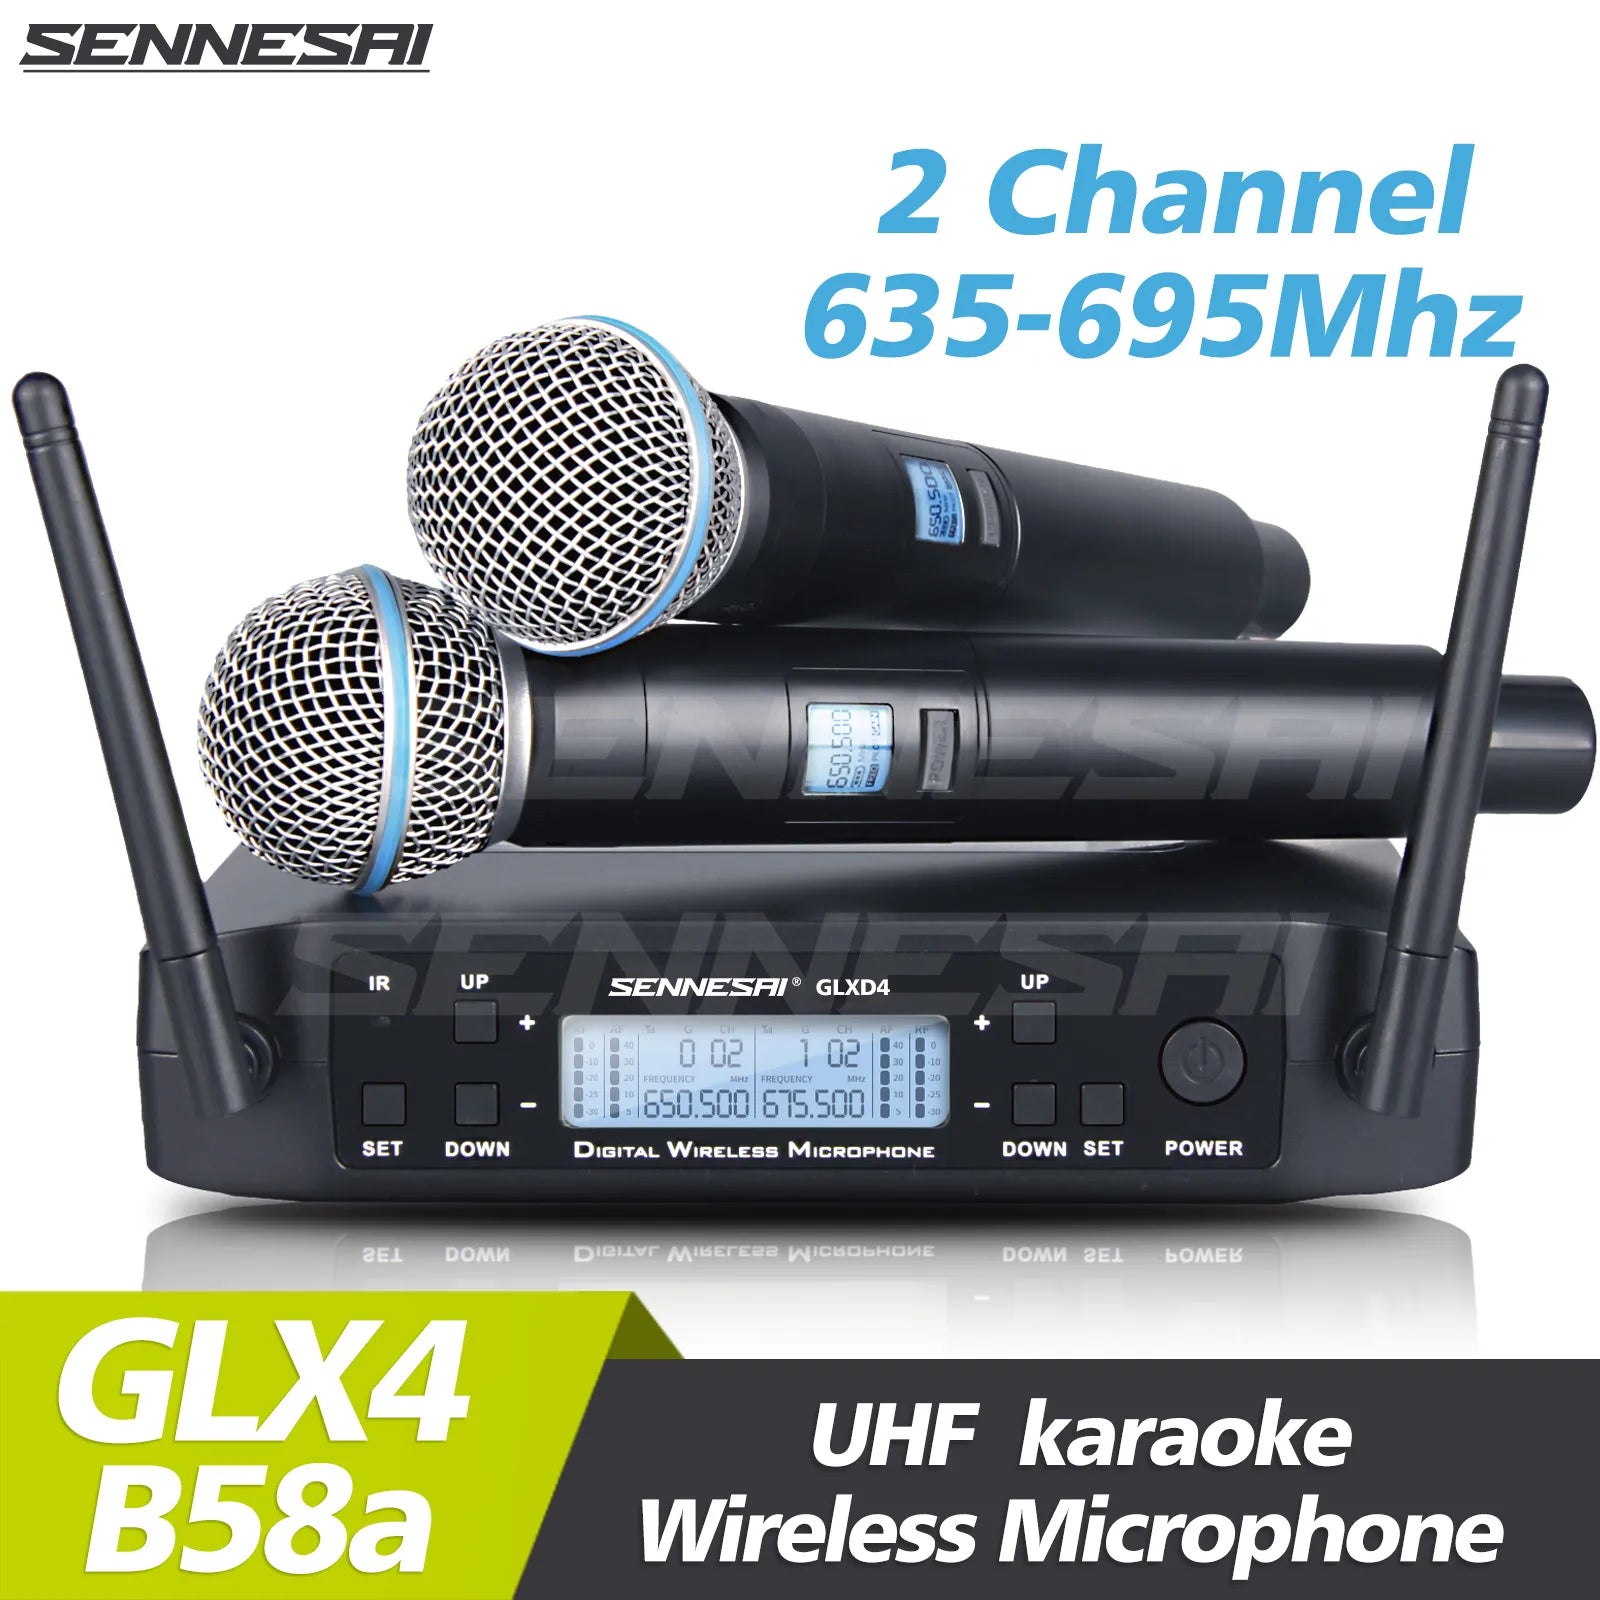 High Quality！ GLXD4 Professional Dual Wireless Microphone 600-699MHz System Stage Performances UHF Dynamic 2 Channel Handheld